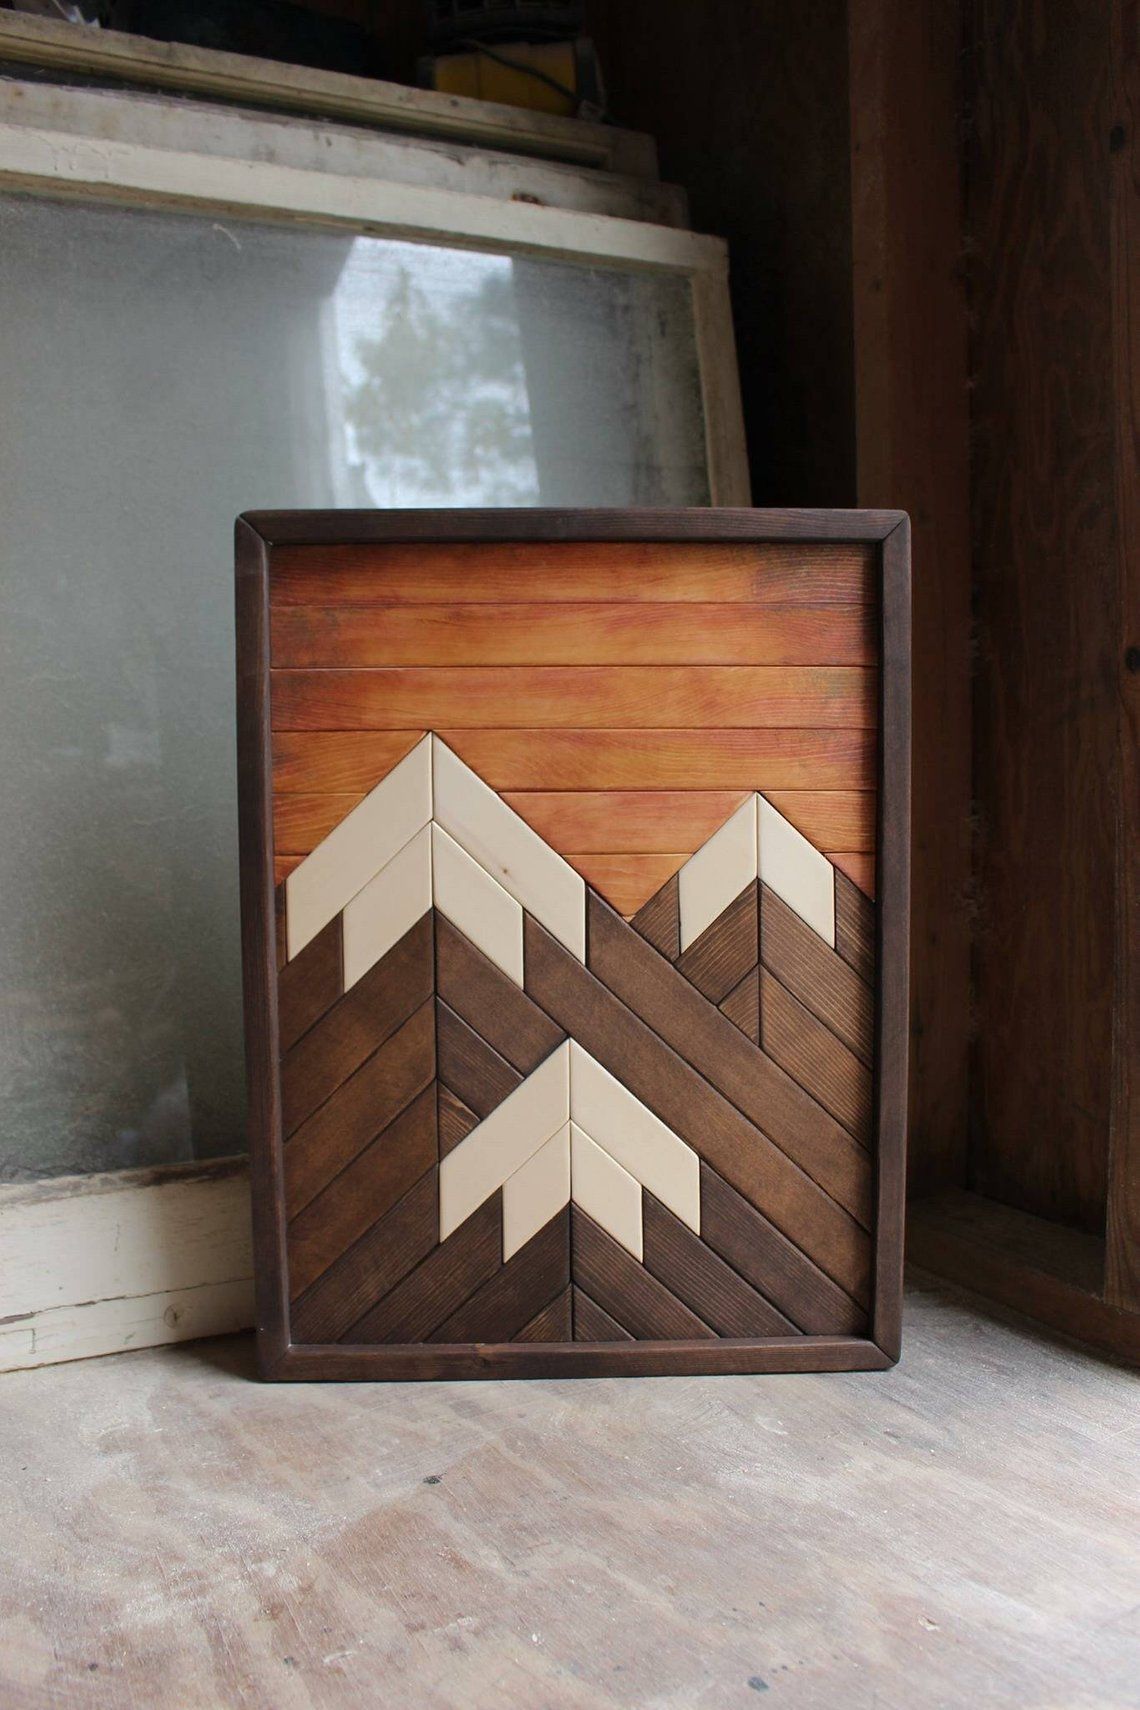 Image 0 | Mountain Wood Art, Wood Wall Art, Wood Art With Regard To Most Popular Mountains Wood Wall Art (View 20 of 20)